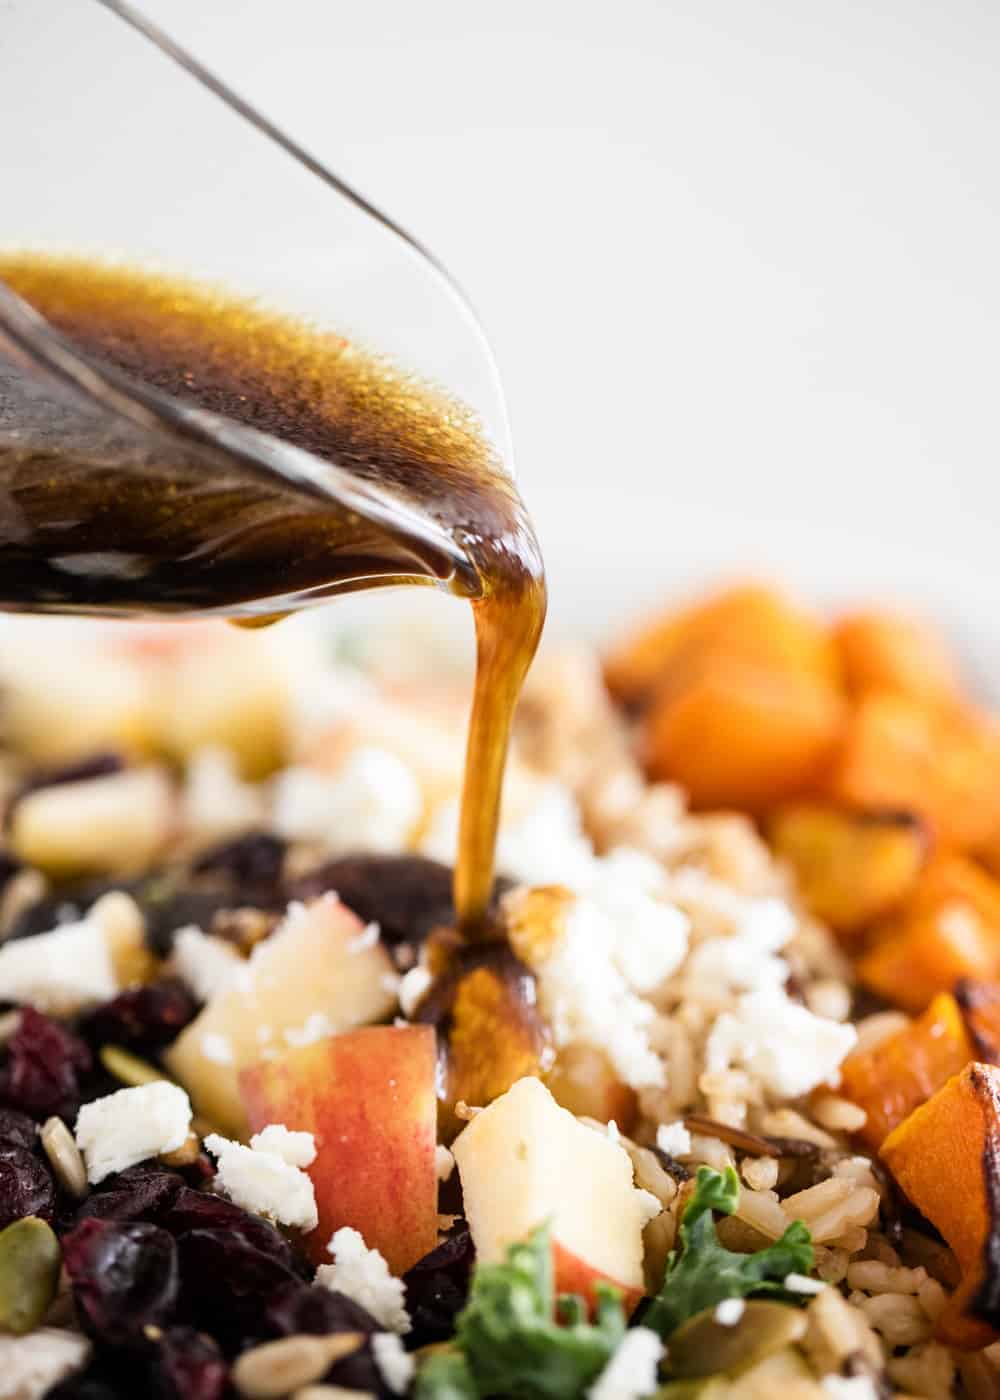 Pouring maple balsamic dressing on top of harvest salad.